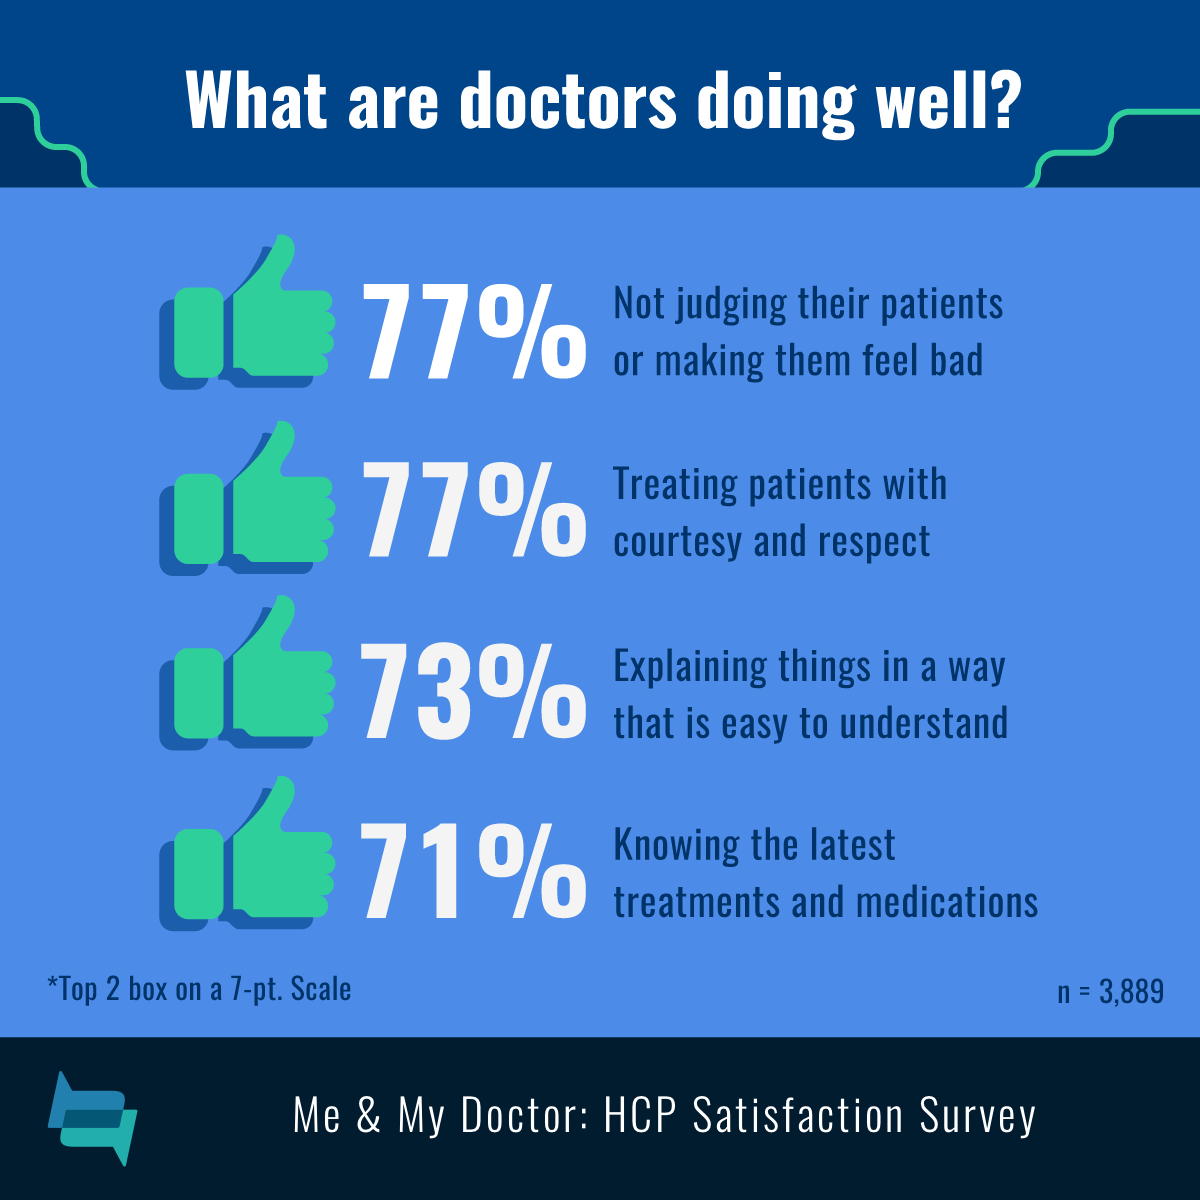 Doctors not judging patients (77%), treating with respect (77%), explaining well (73%), and knowing new treatments (71%).